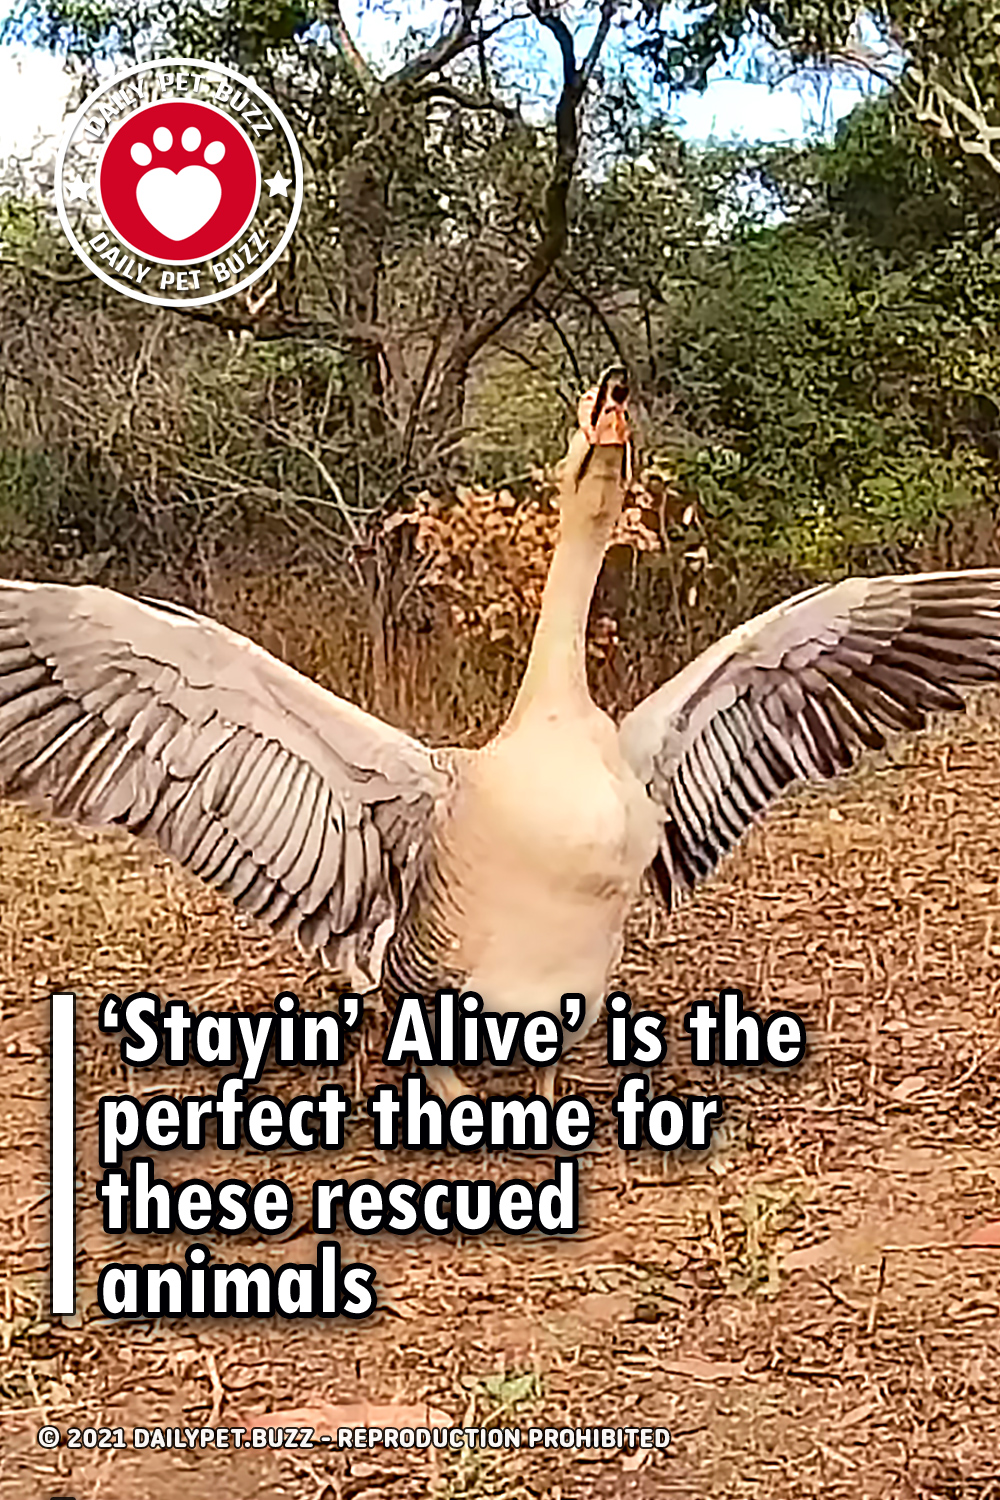 ‘Stayin’ Alive’ is the perfect theme for these rescued animals